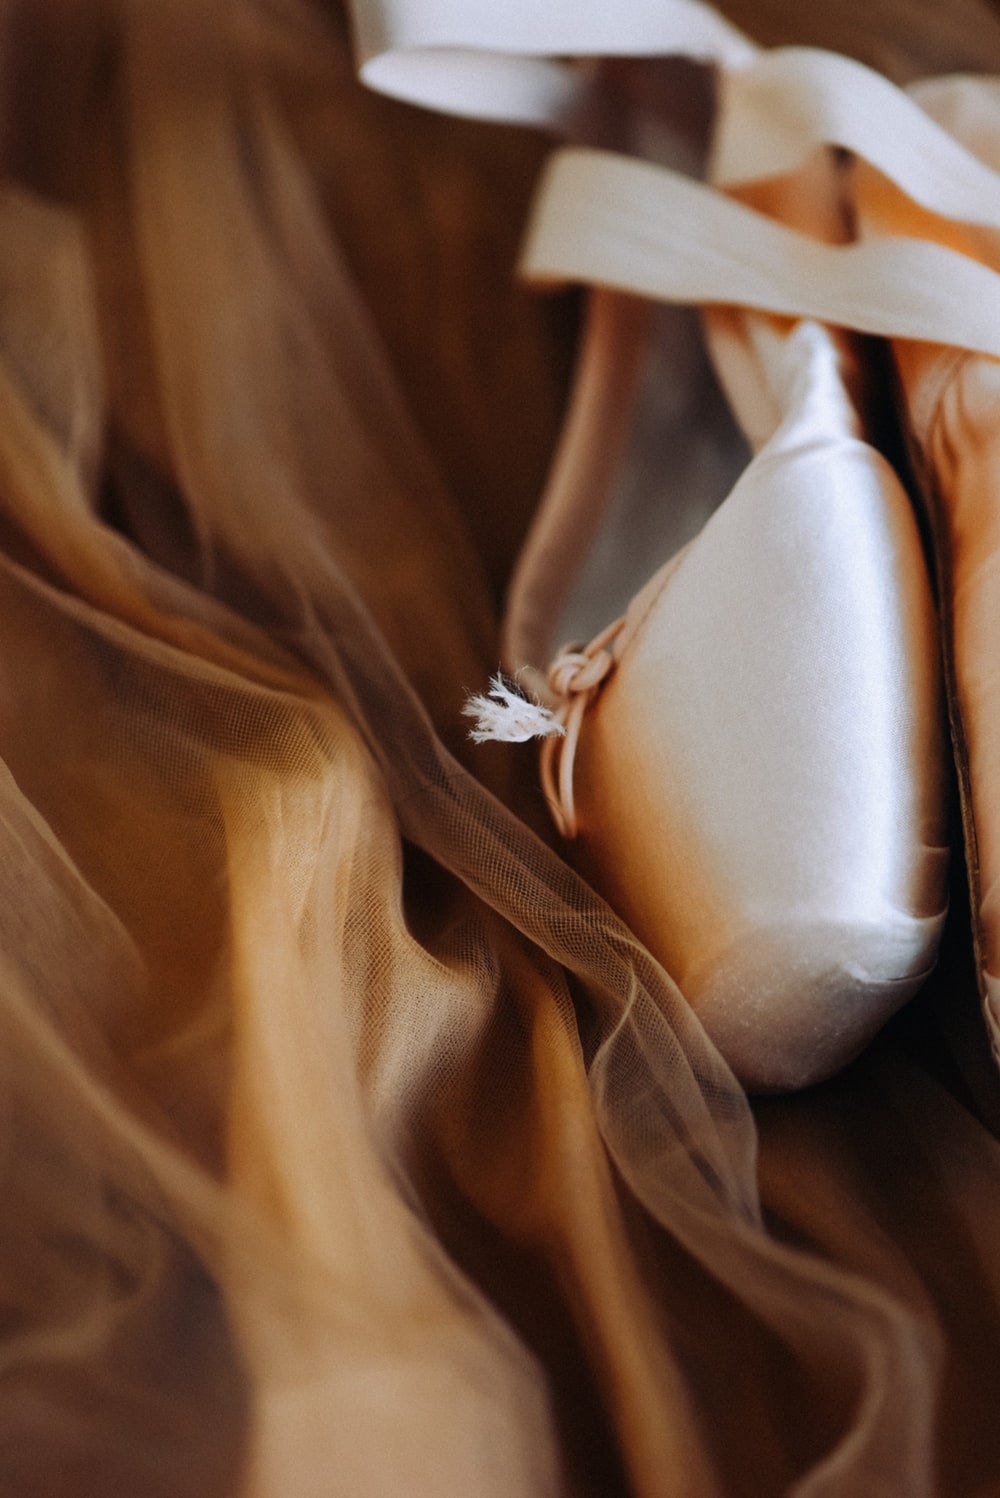 Pointe shoe in tulle